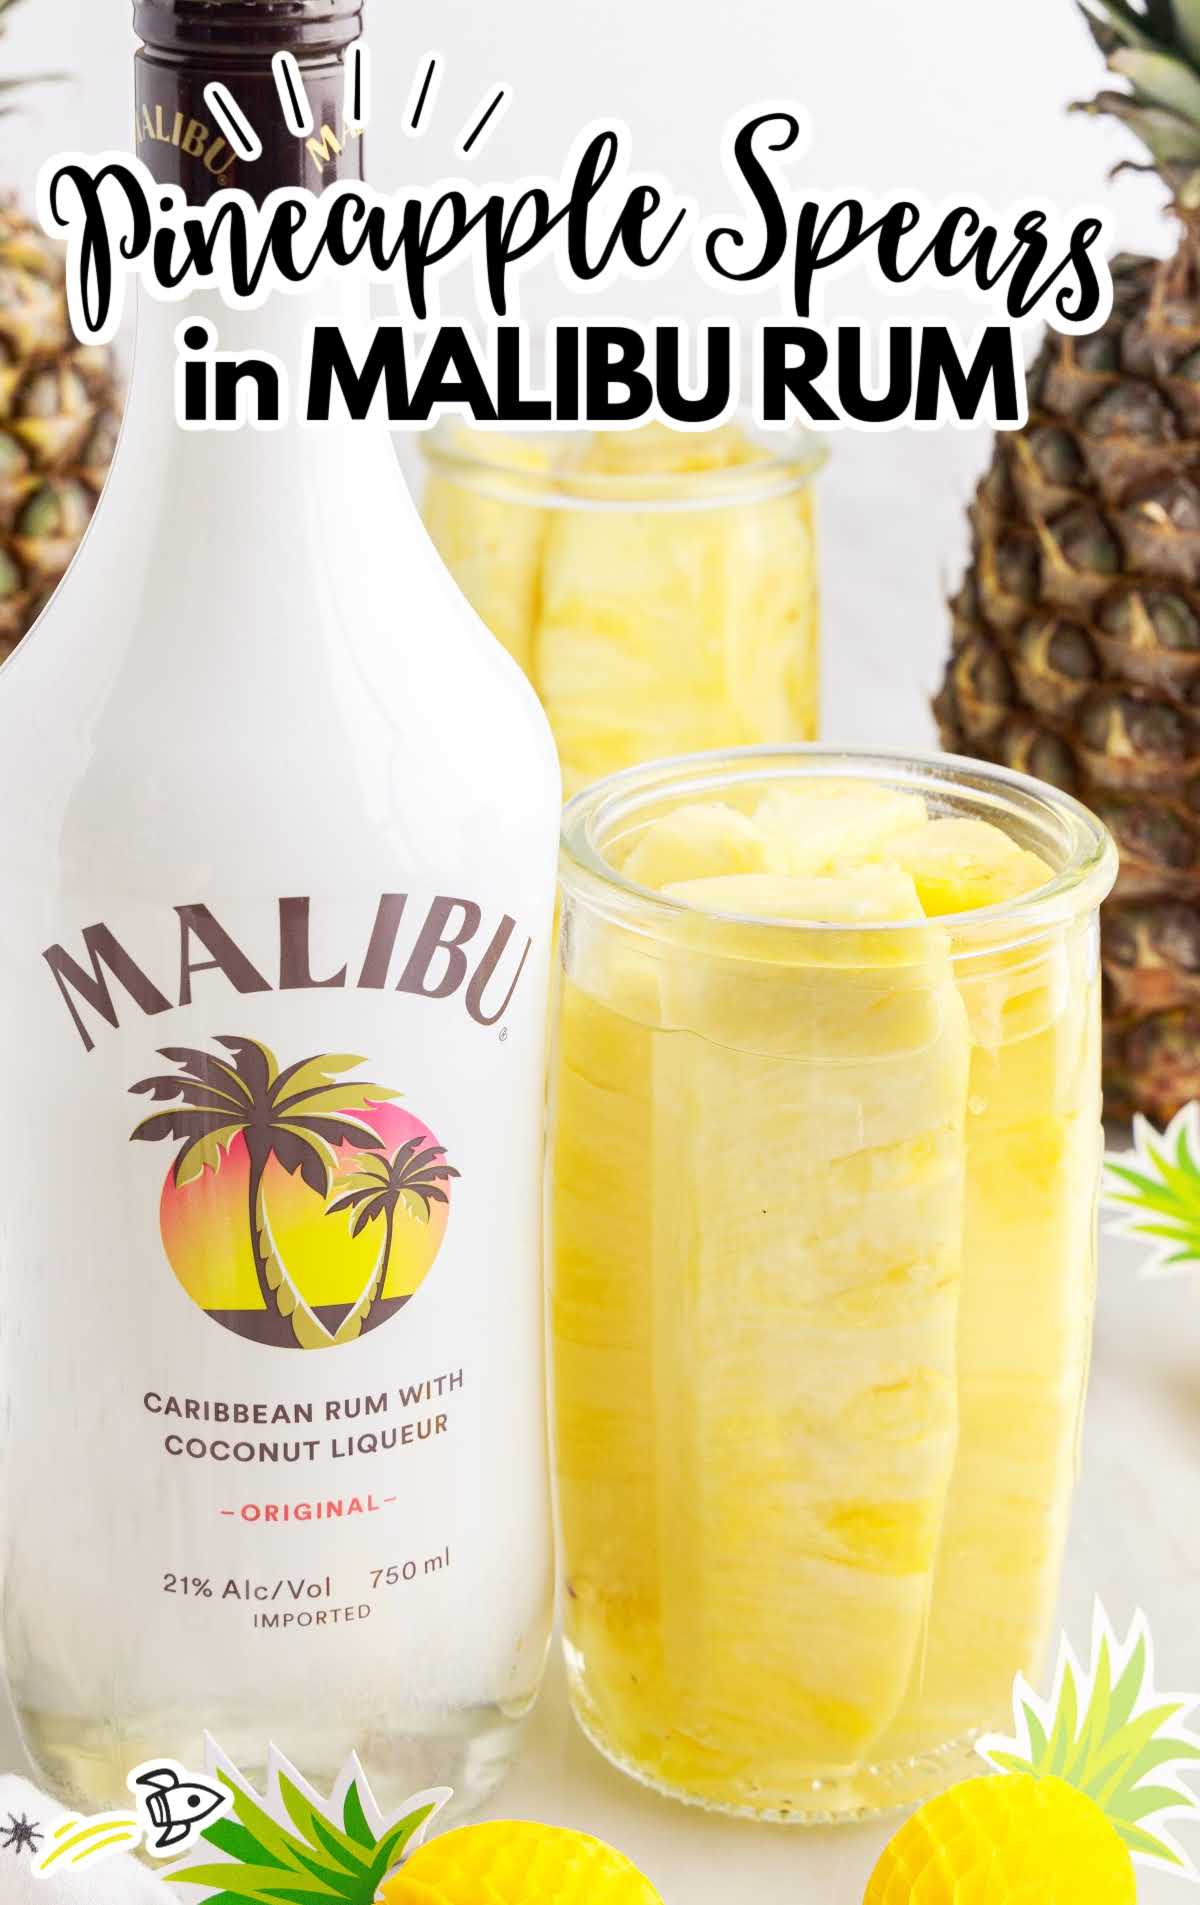 A close up of a bottle and a glass of orange juice, with Pineapple and Malibu